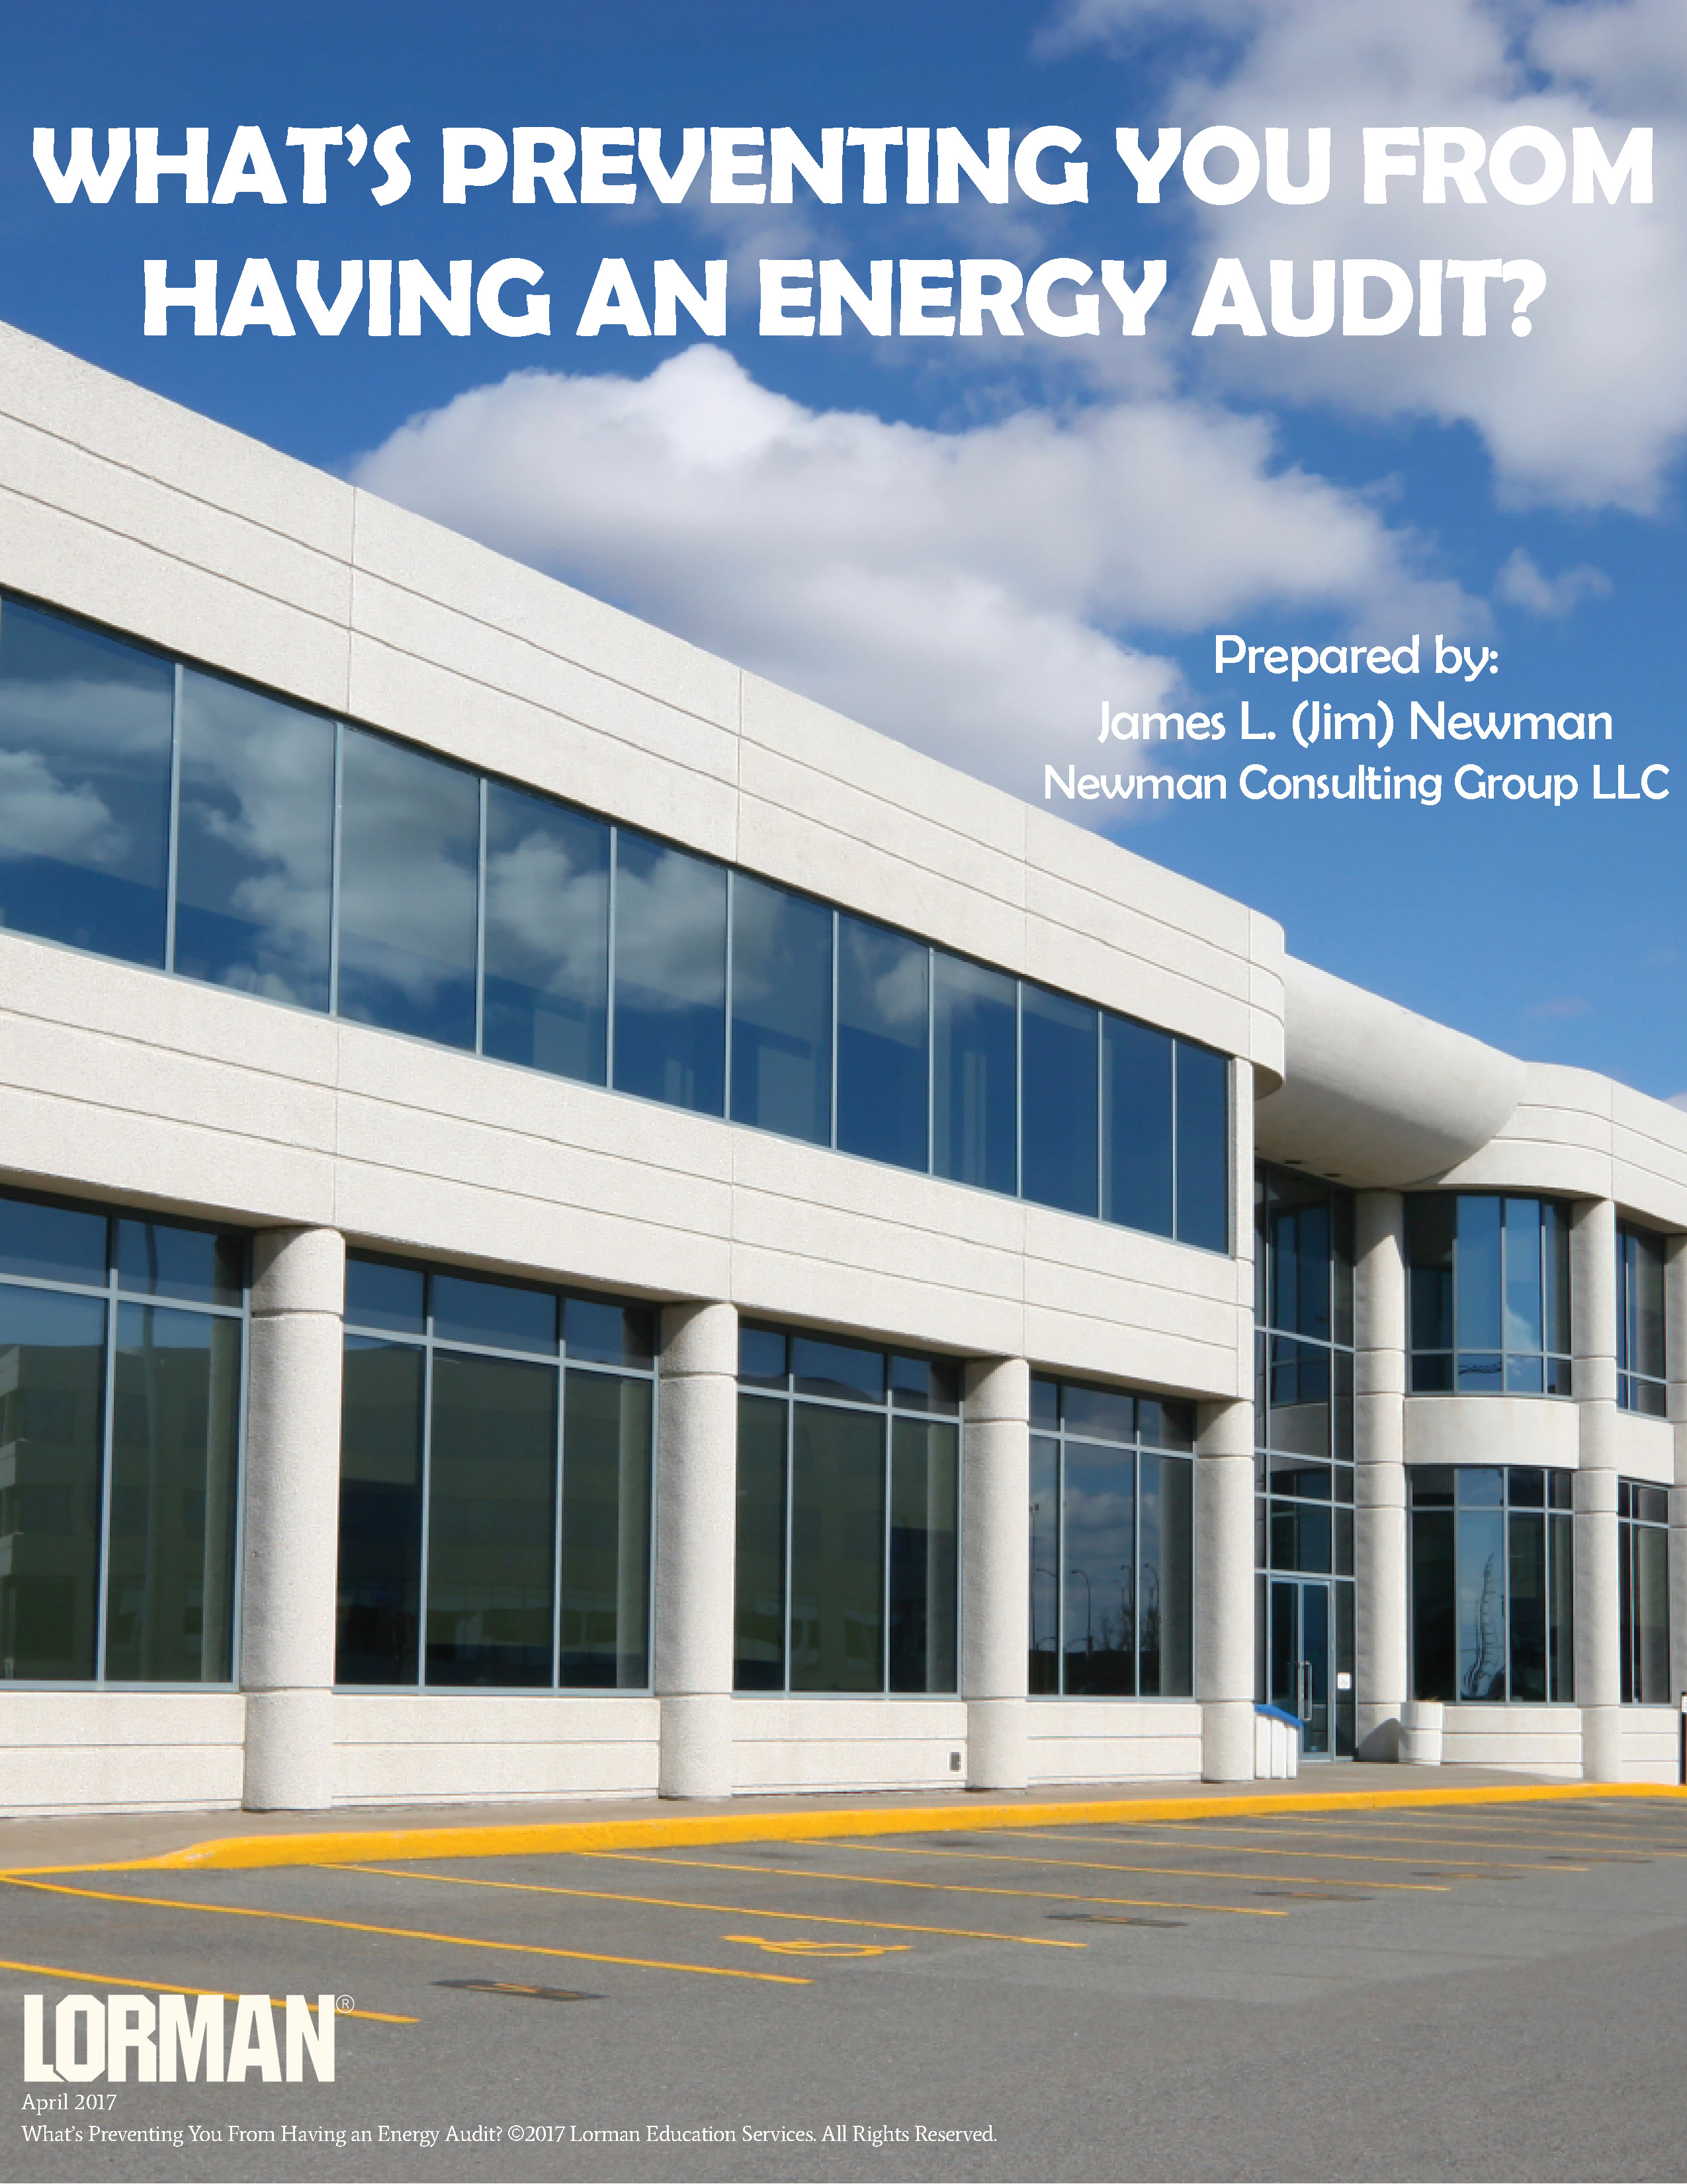 What’s Preventing You From Having an Energy Audit?